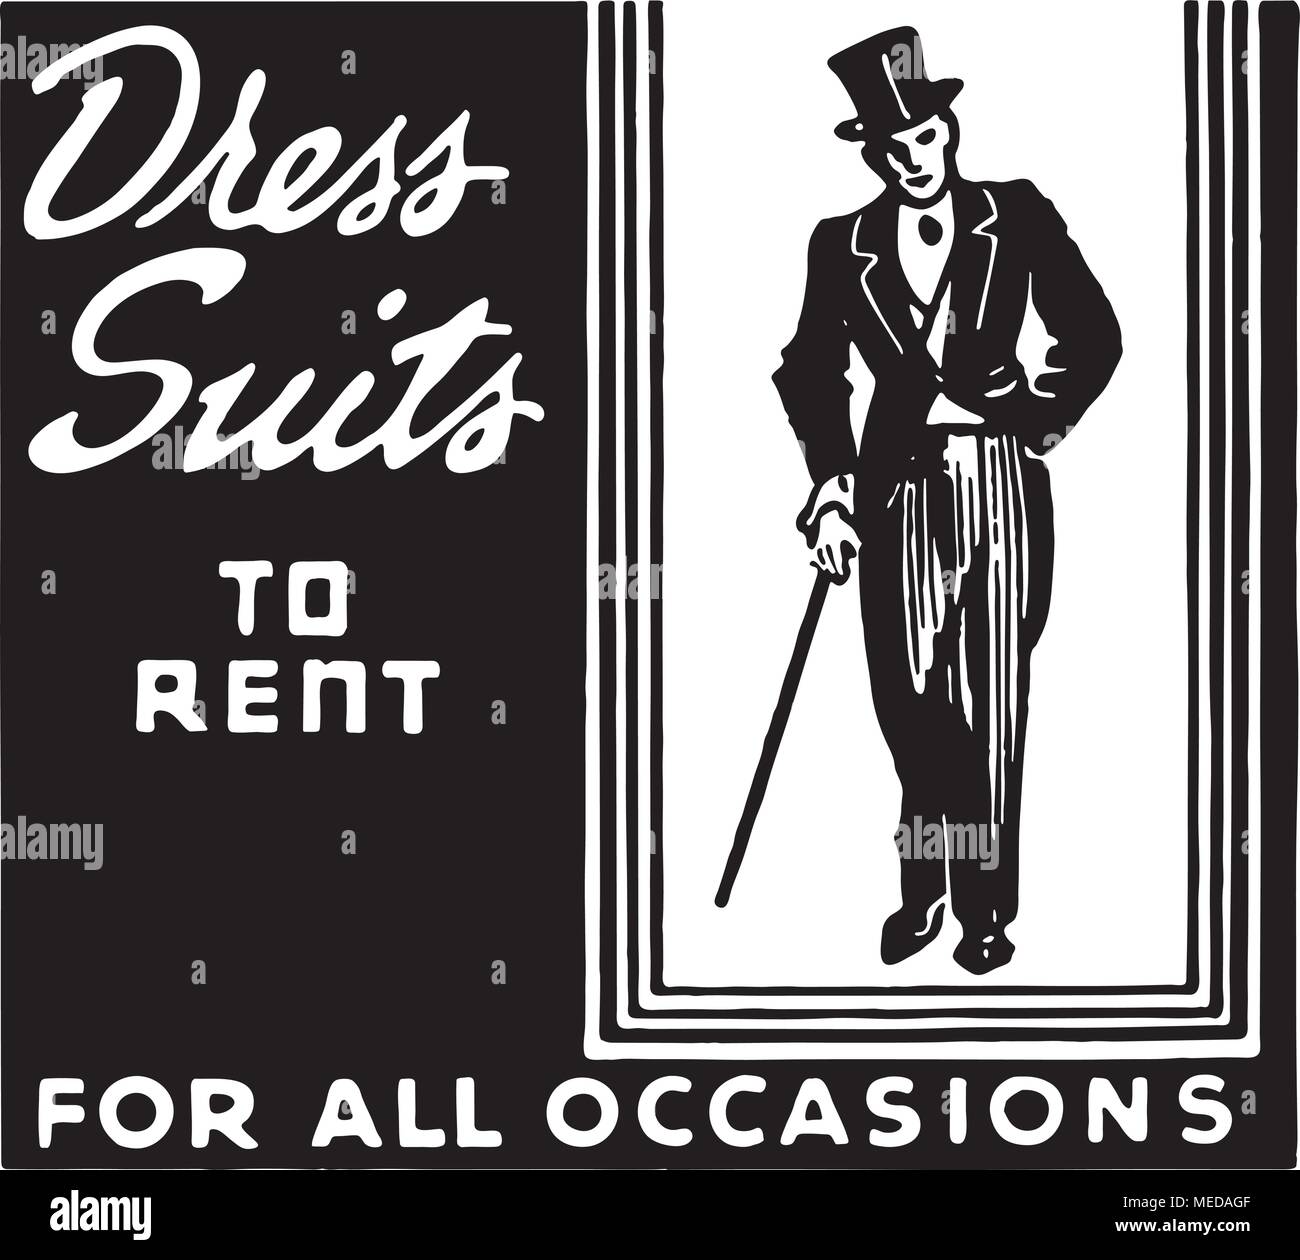 Dress Suits To Rent - Retro Ad Art Banner Stock Vector